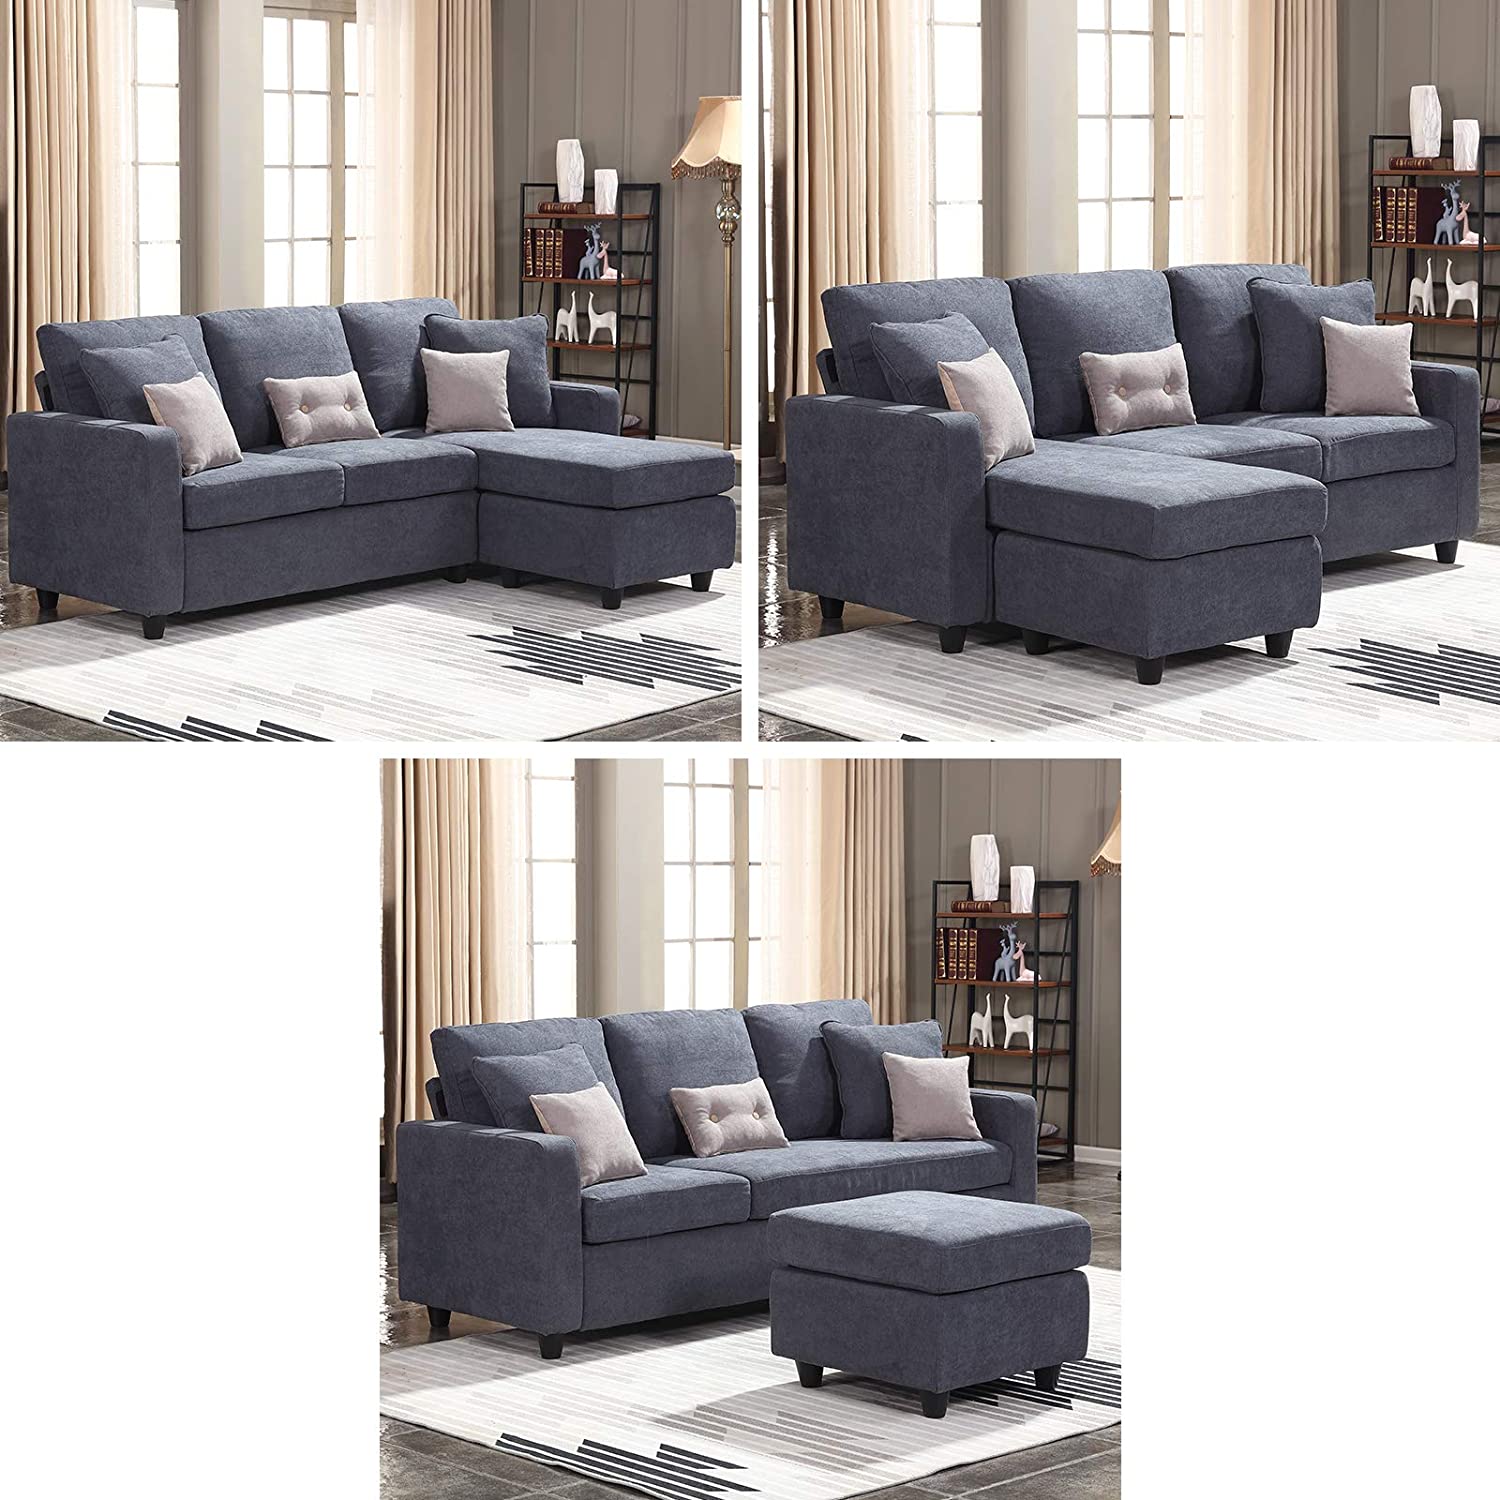 L-Shaped Couch, HONBAY Convertible Sectional Sofa Couch